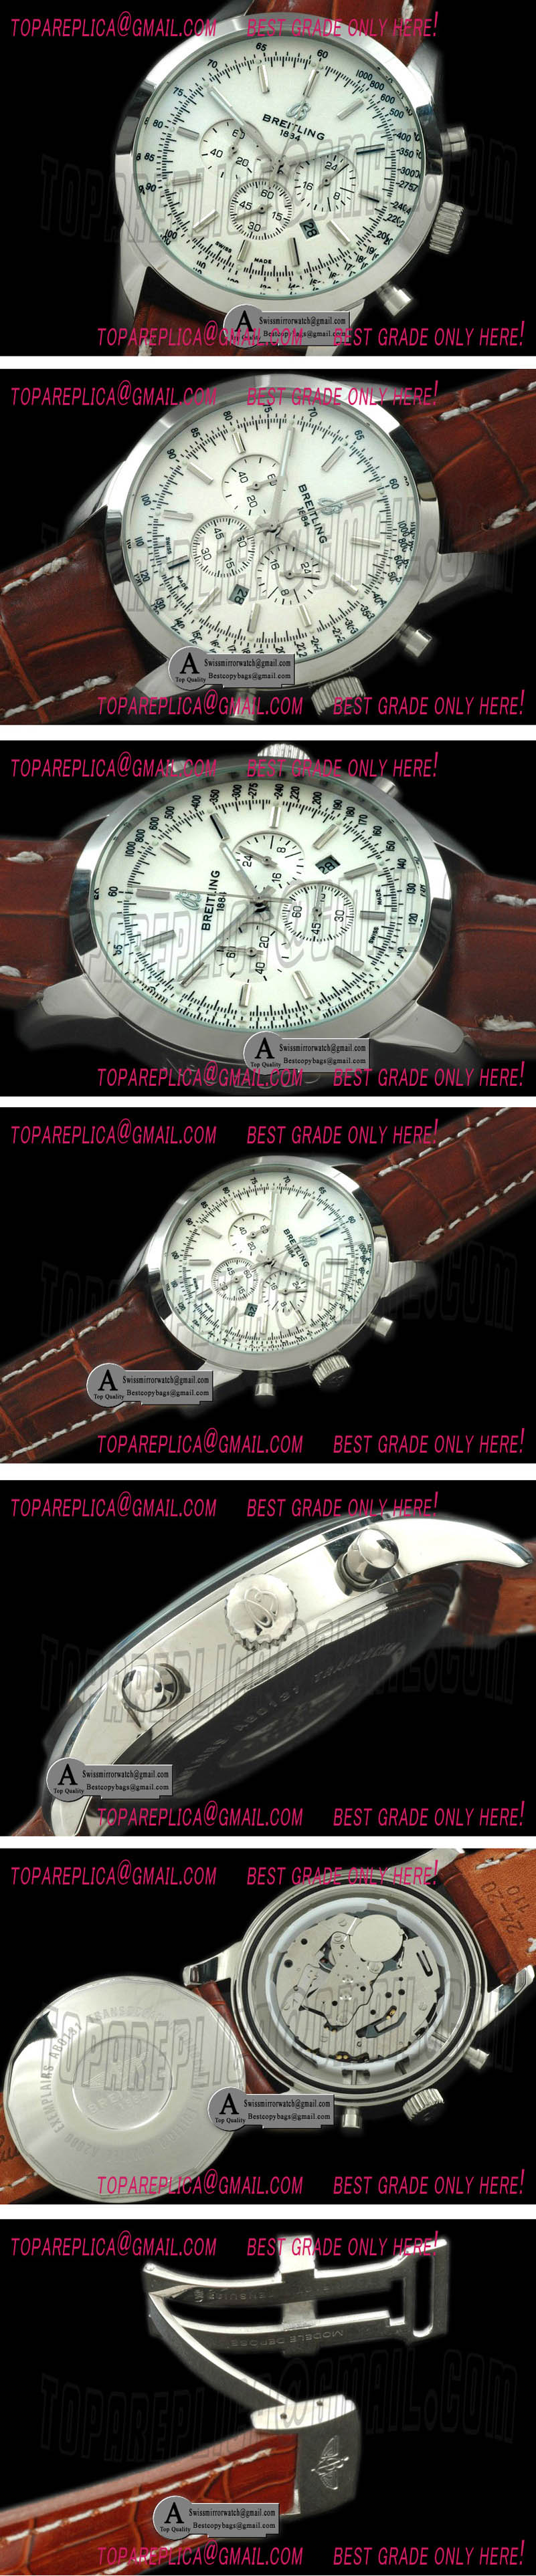 Breitling TransOcean Chrono SS/Leather White Jap OS20 Qtz Replica Watches